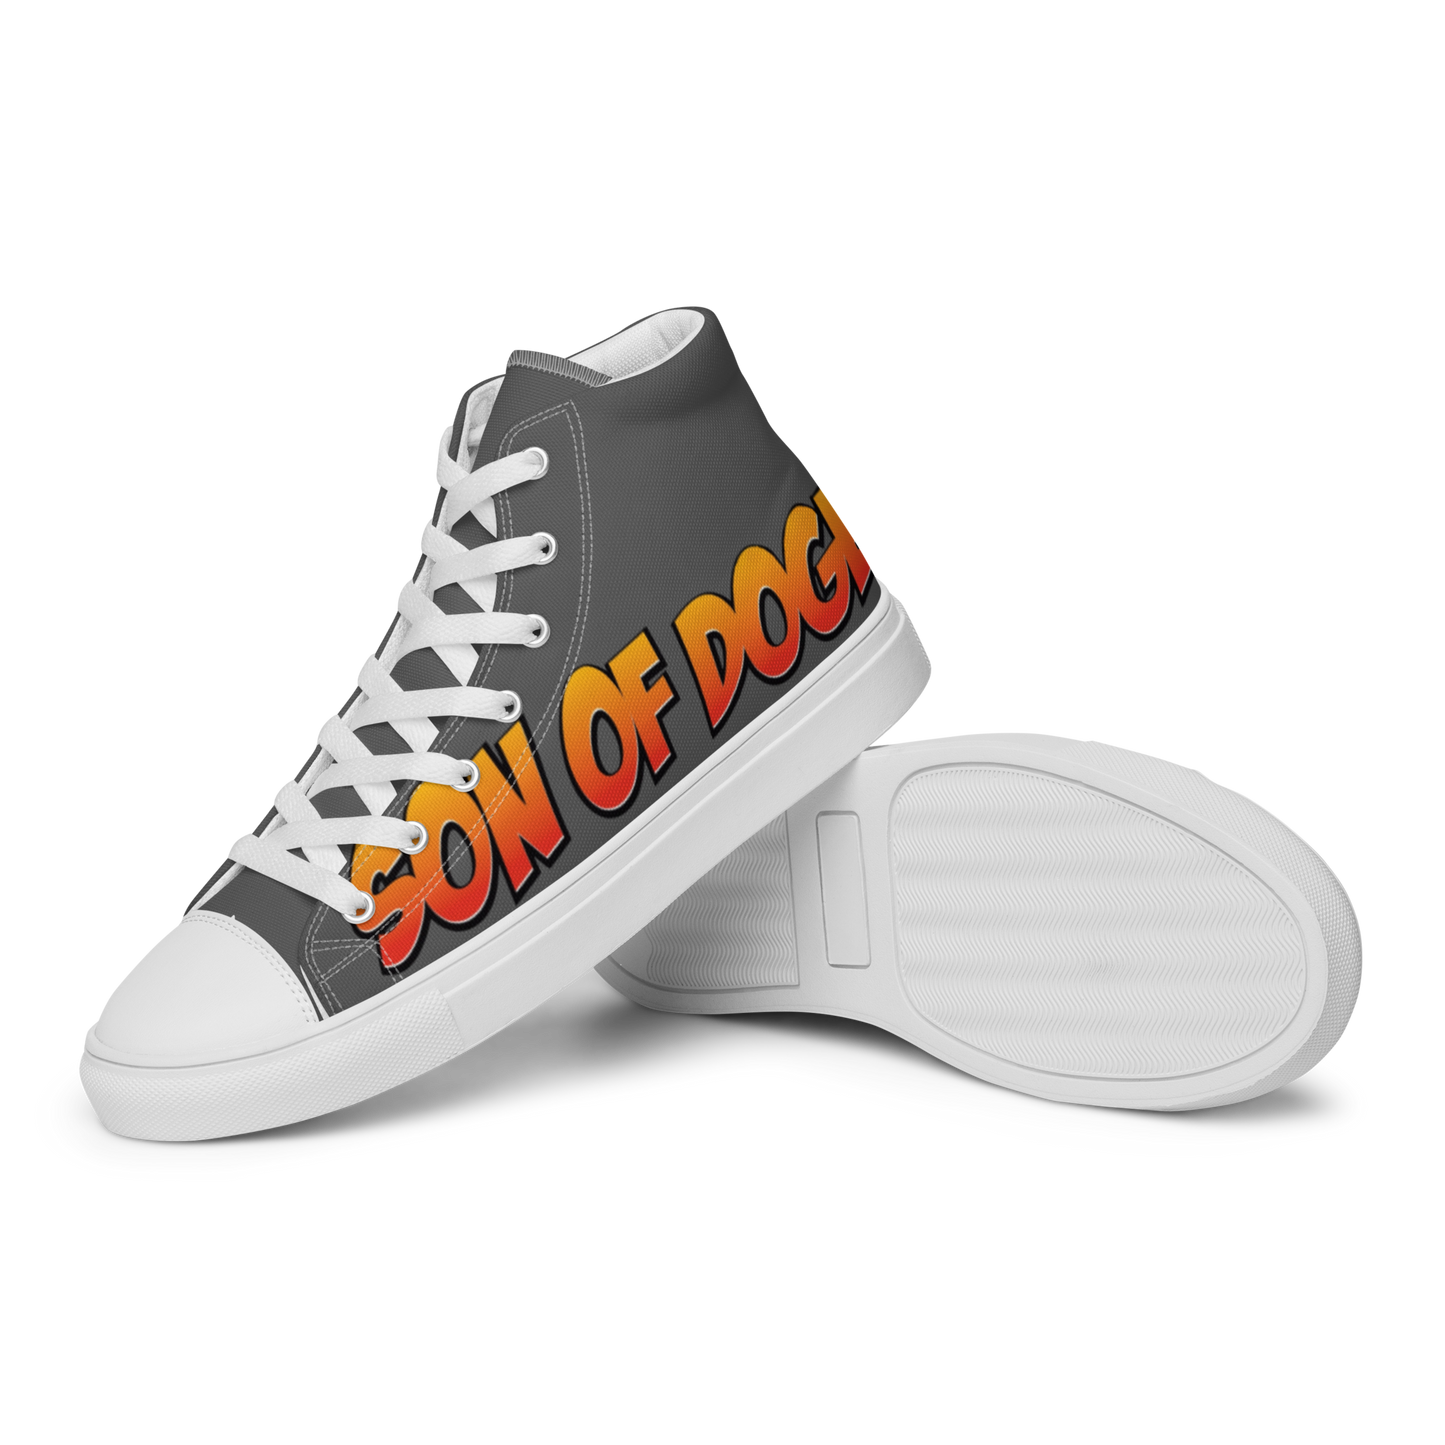 Son Of Doge - Men’s high top canvas shoes (Grey)